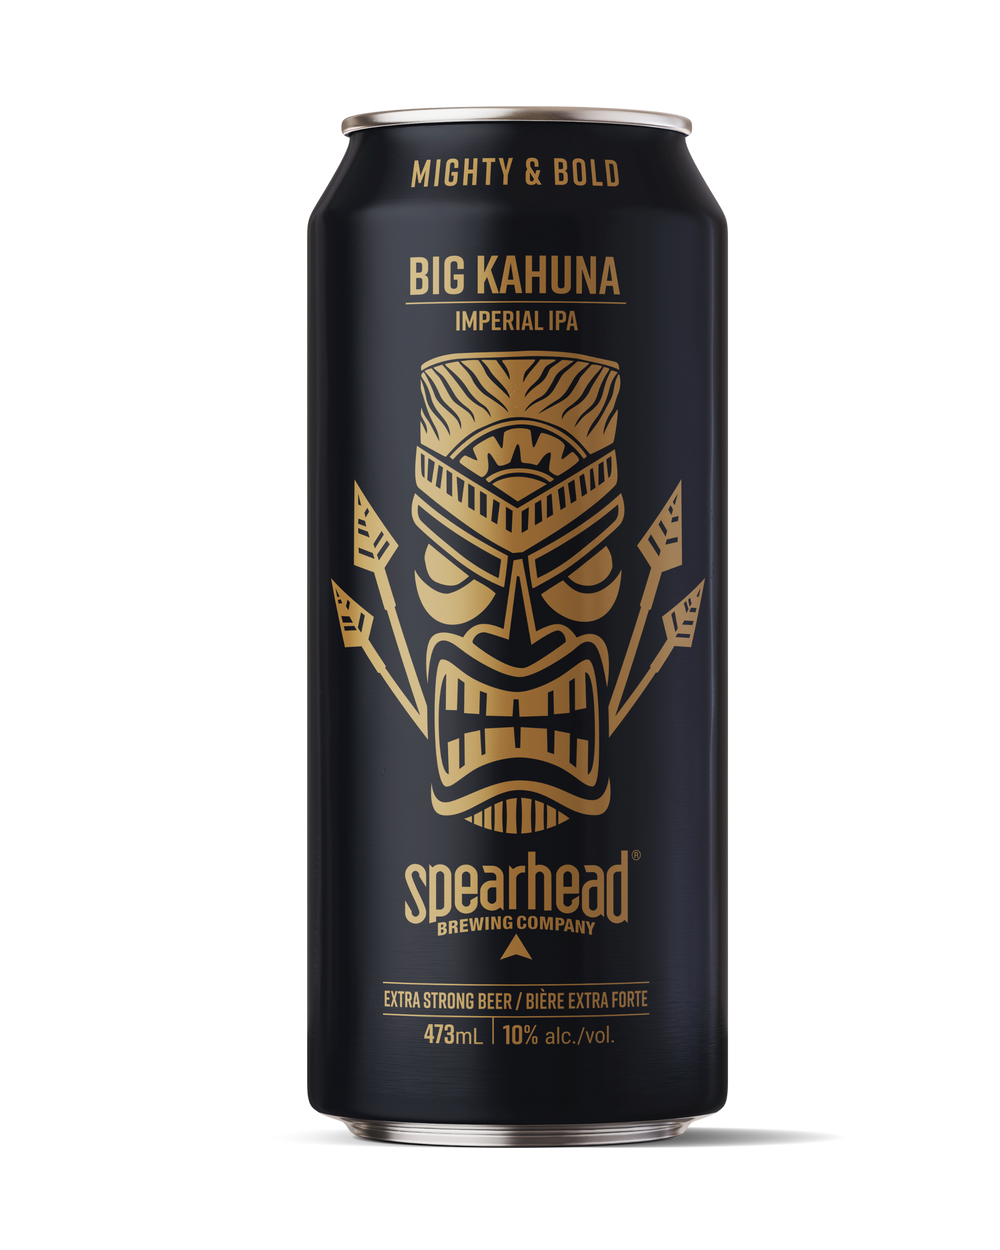 Big Kahuna Imperial IPA - Single can 6 Pack Price